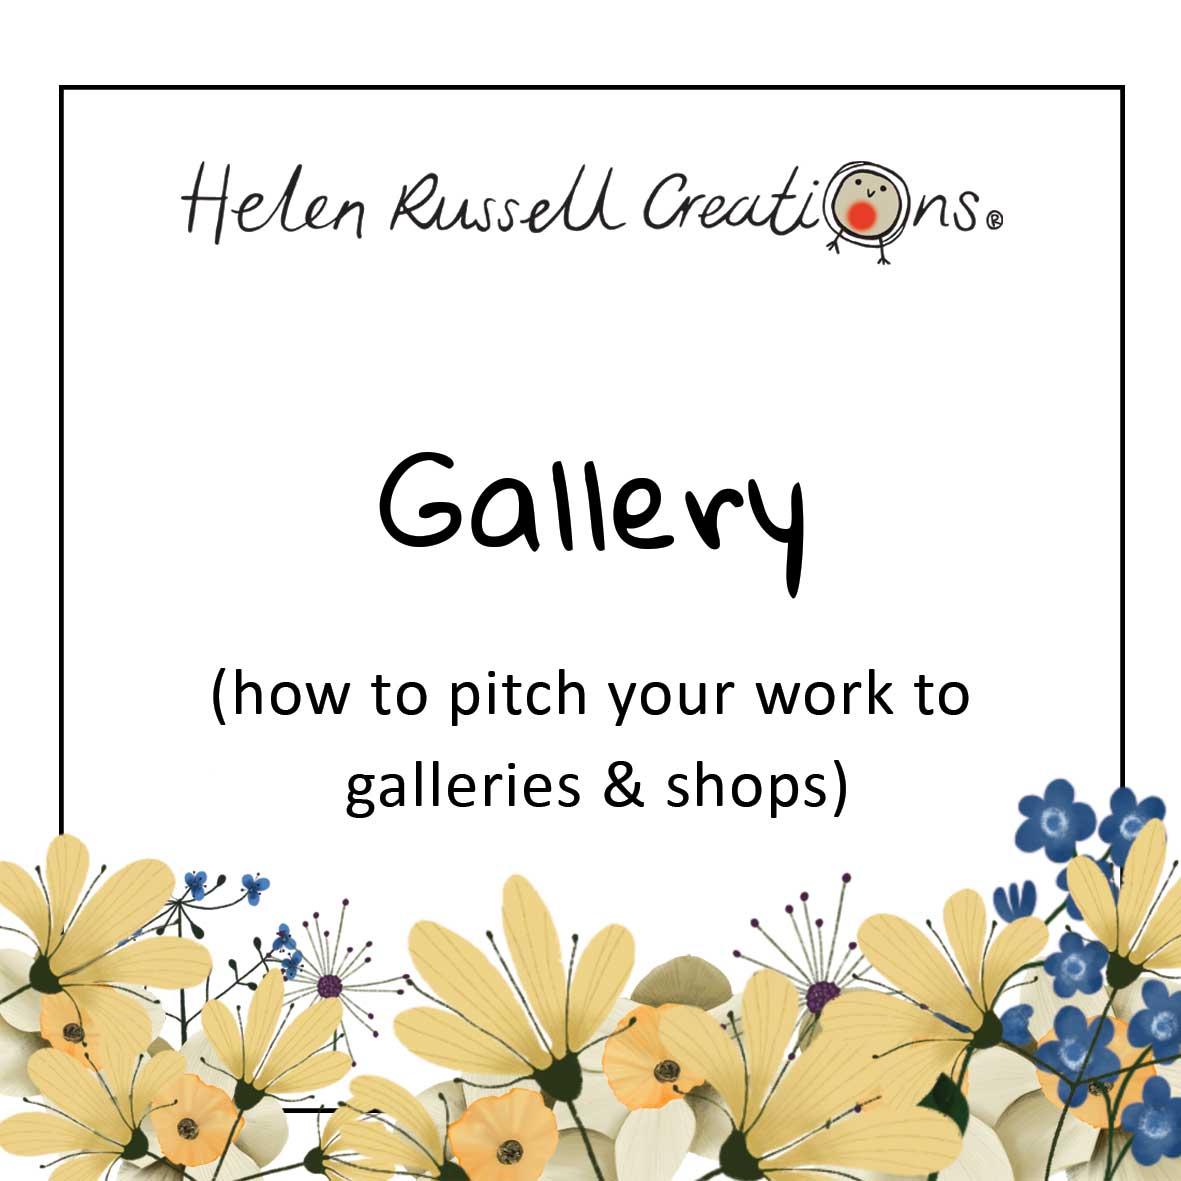 Gallery, how to pitch your work to galleries and shops